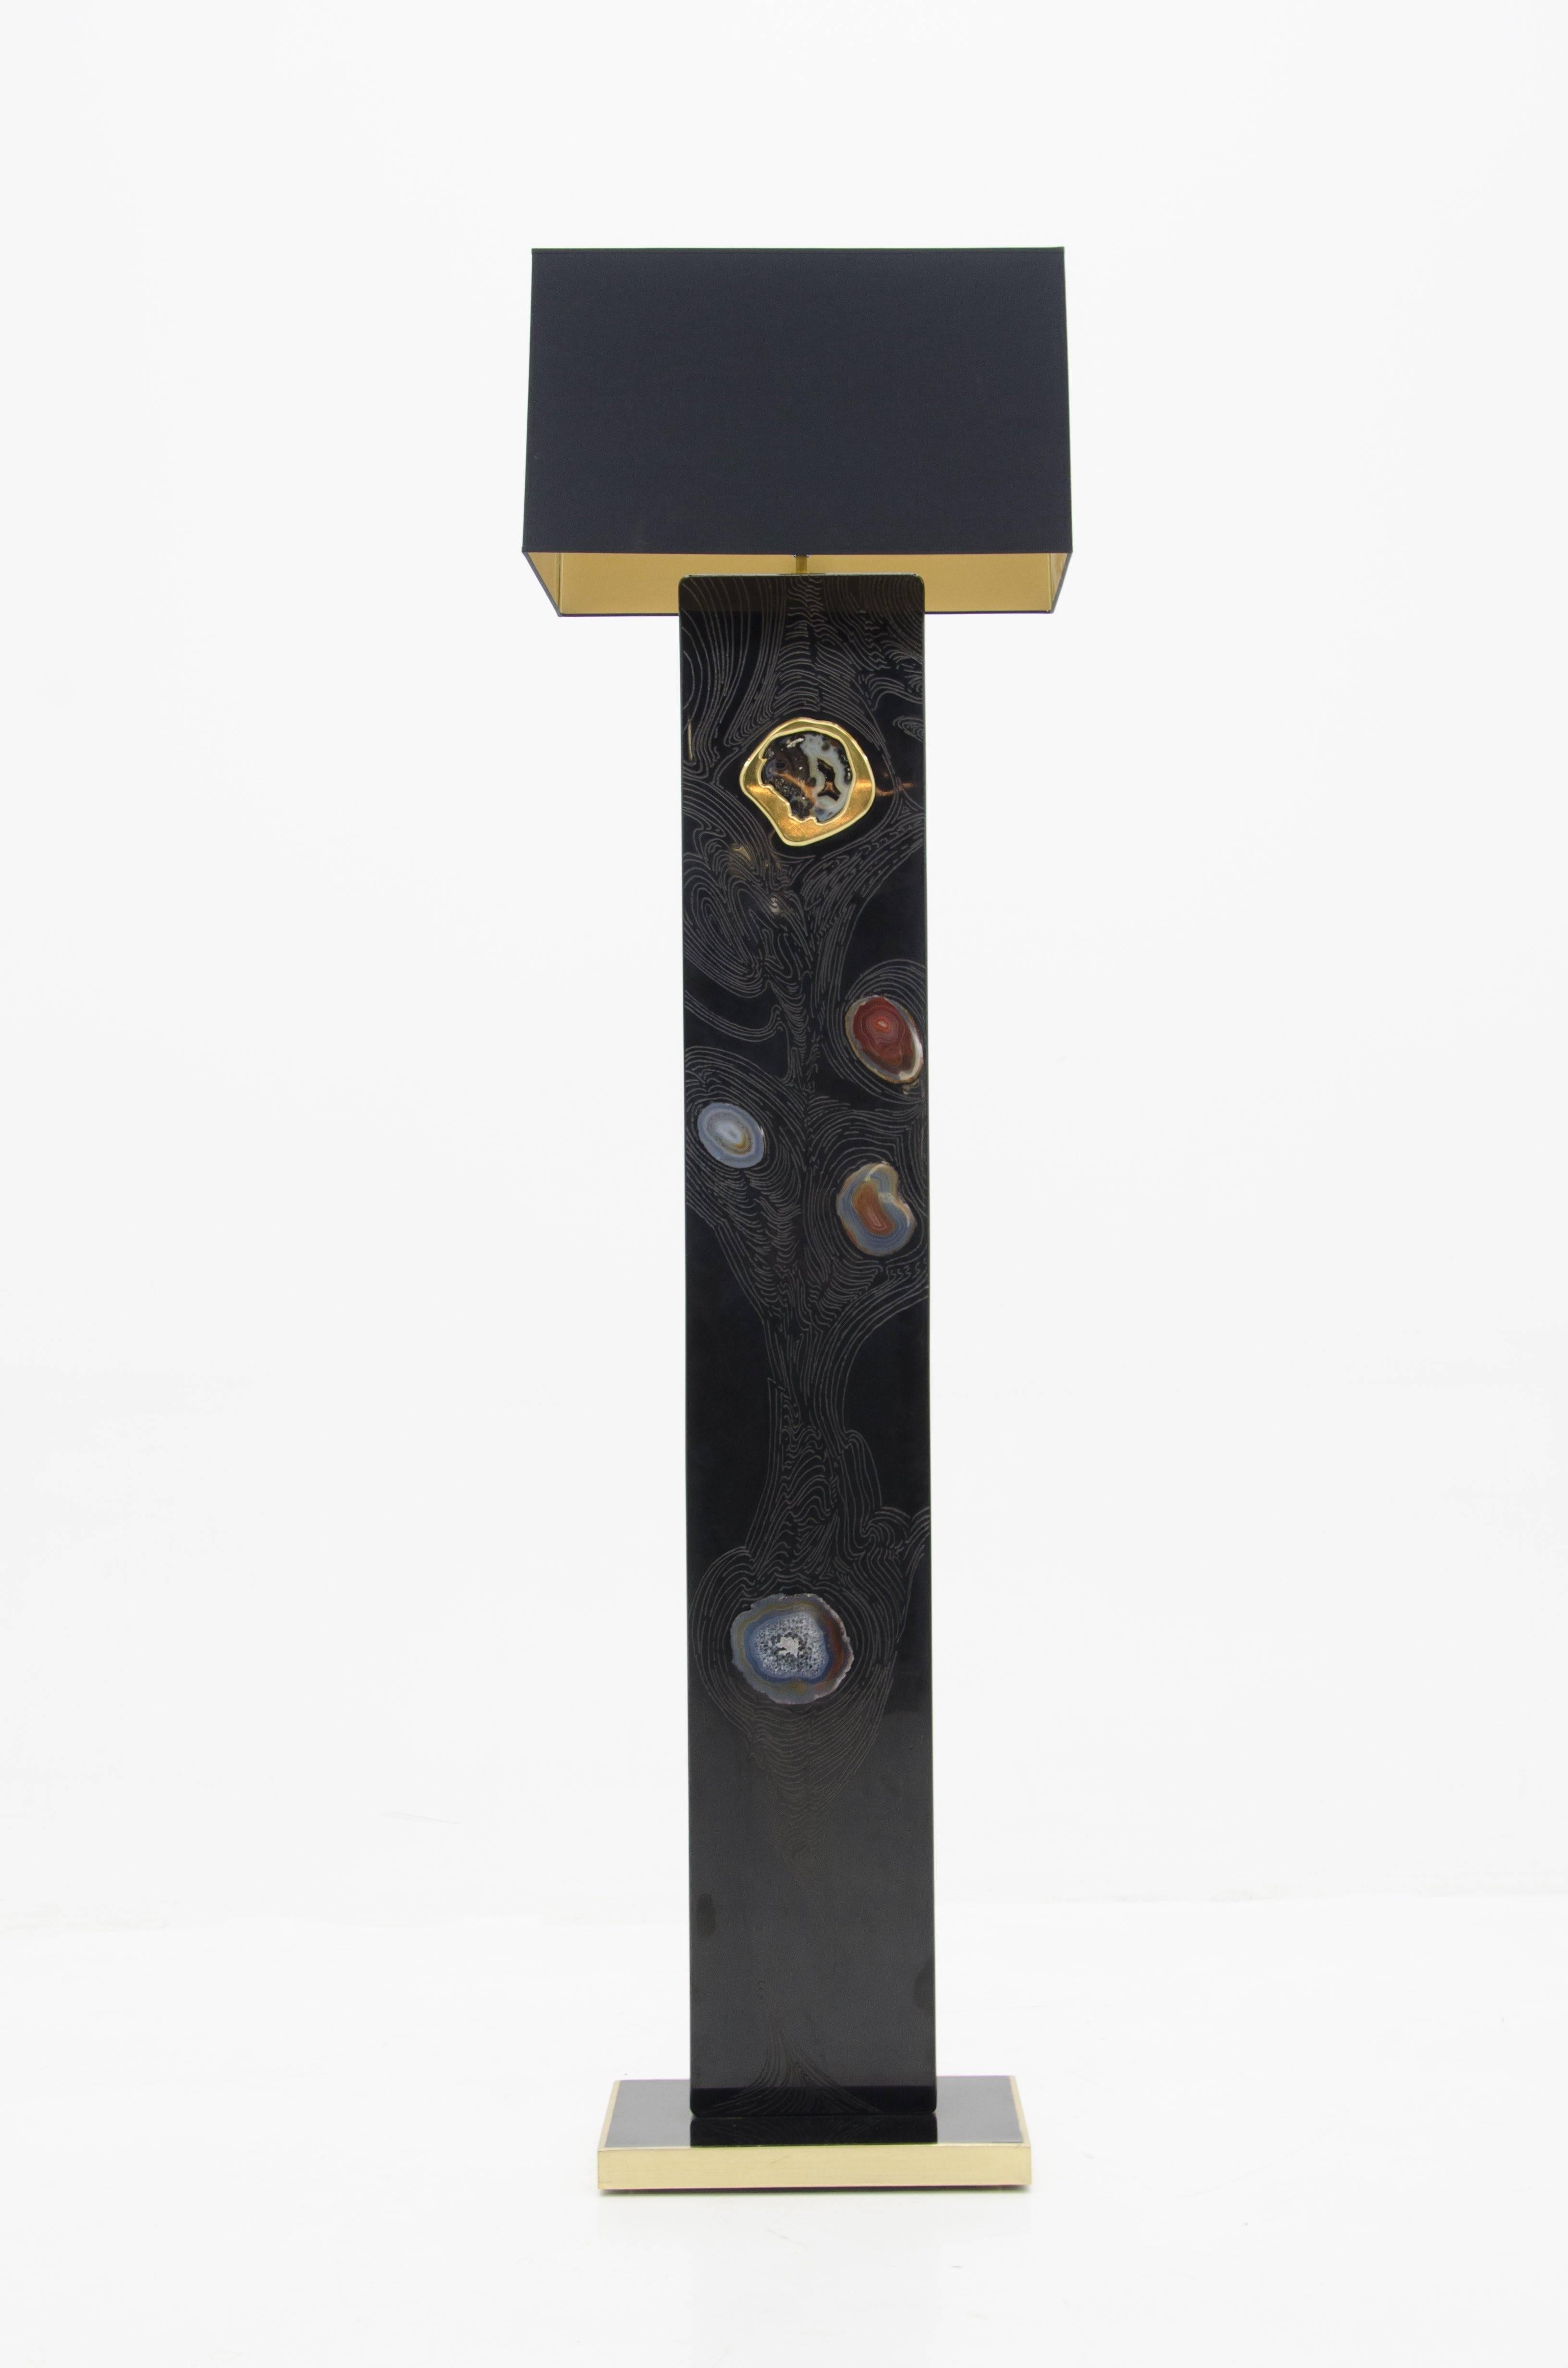 One of a kind studio built floor lamp black resin with inlaid agate by Stan Usel.
These pieces are made exclusively and distributed in USA for Saint Germain antiques. Exceptional craftsmanship. All pieces can be custom-made to order. Signed by the